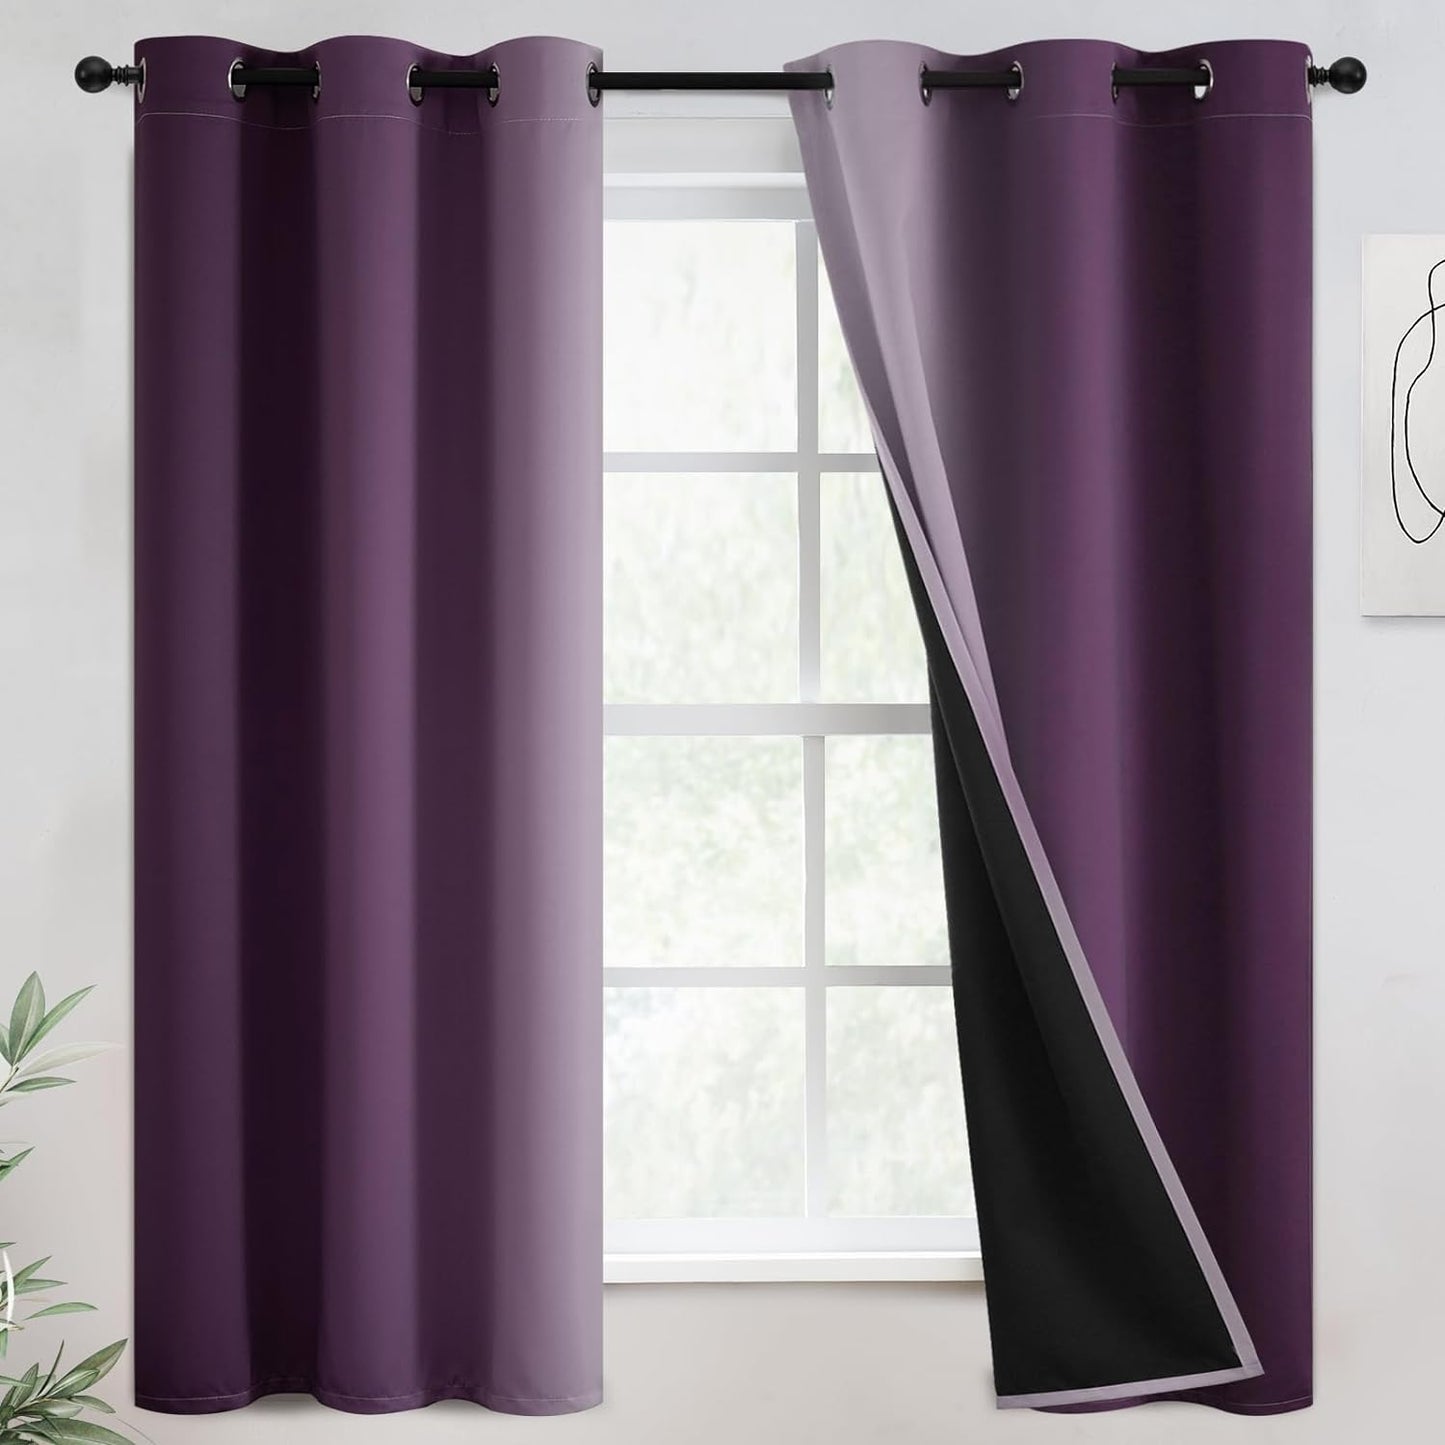 COSVIYA 100% Blackout Curtains & Drapes Ombre Purple Curtains 63 Inch Length 2 Panels,Full Room Darkening Grommet Gradient Insulated Thermal Window Curtains for Bedroom/Living Room,52X63 Inches  COSVIYA Blackout Purple To Grayish White 42W X 63L 